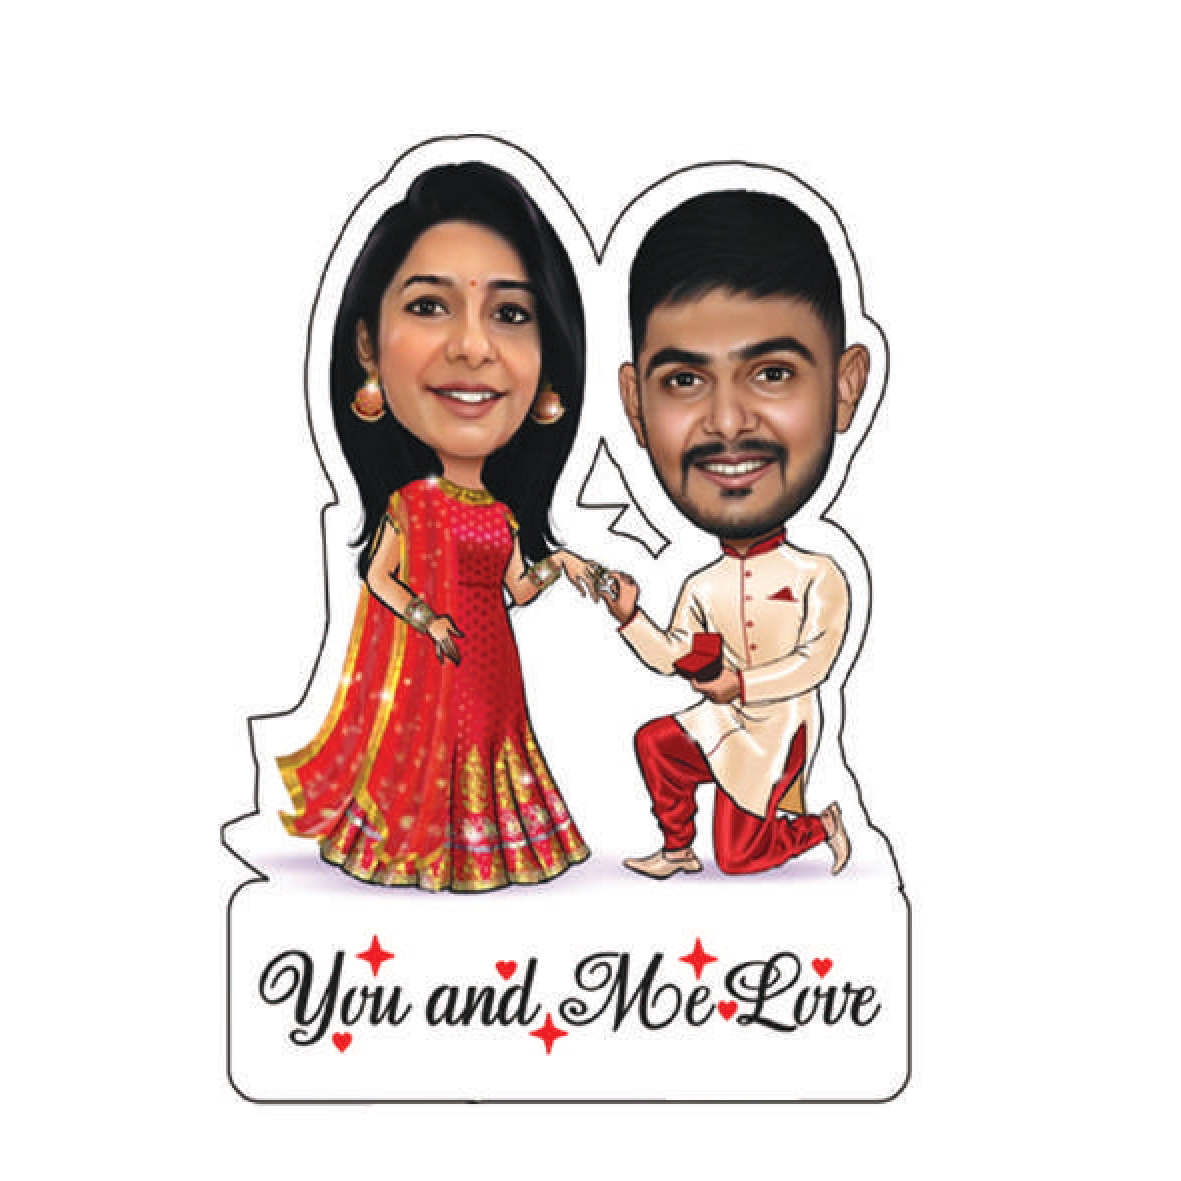 Photo Printed Caricature for mom and dad | Caricature Gifts Personalised  for mom and mom |